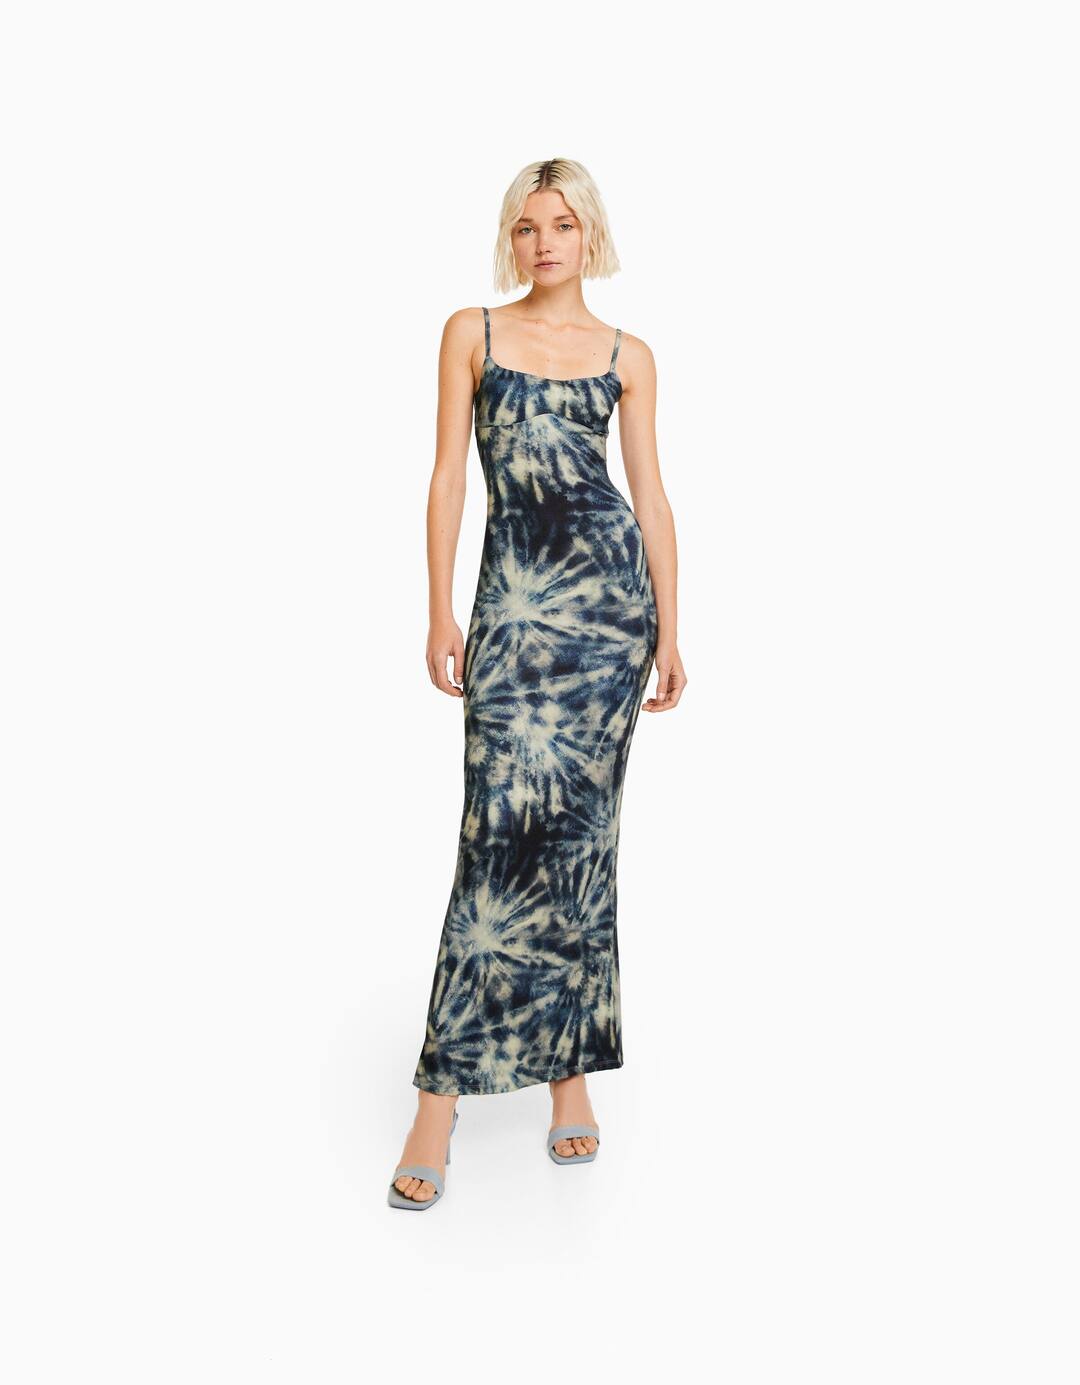 Long dress with tie dye effect and straps